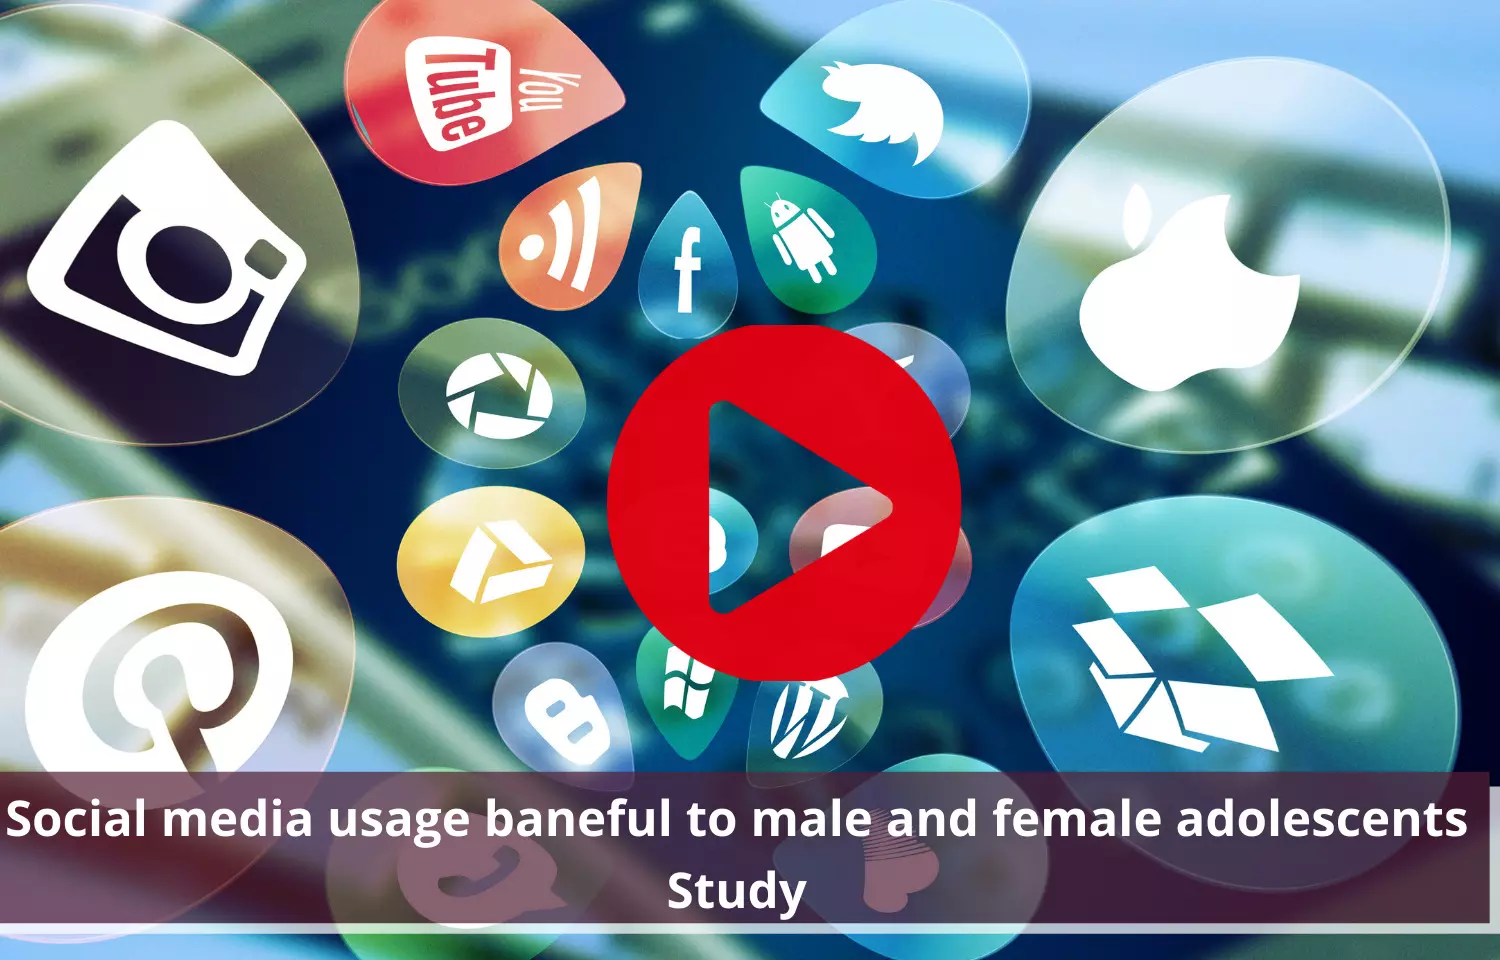 Journal Club - Social media usage baneful to male and female adolescents Study